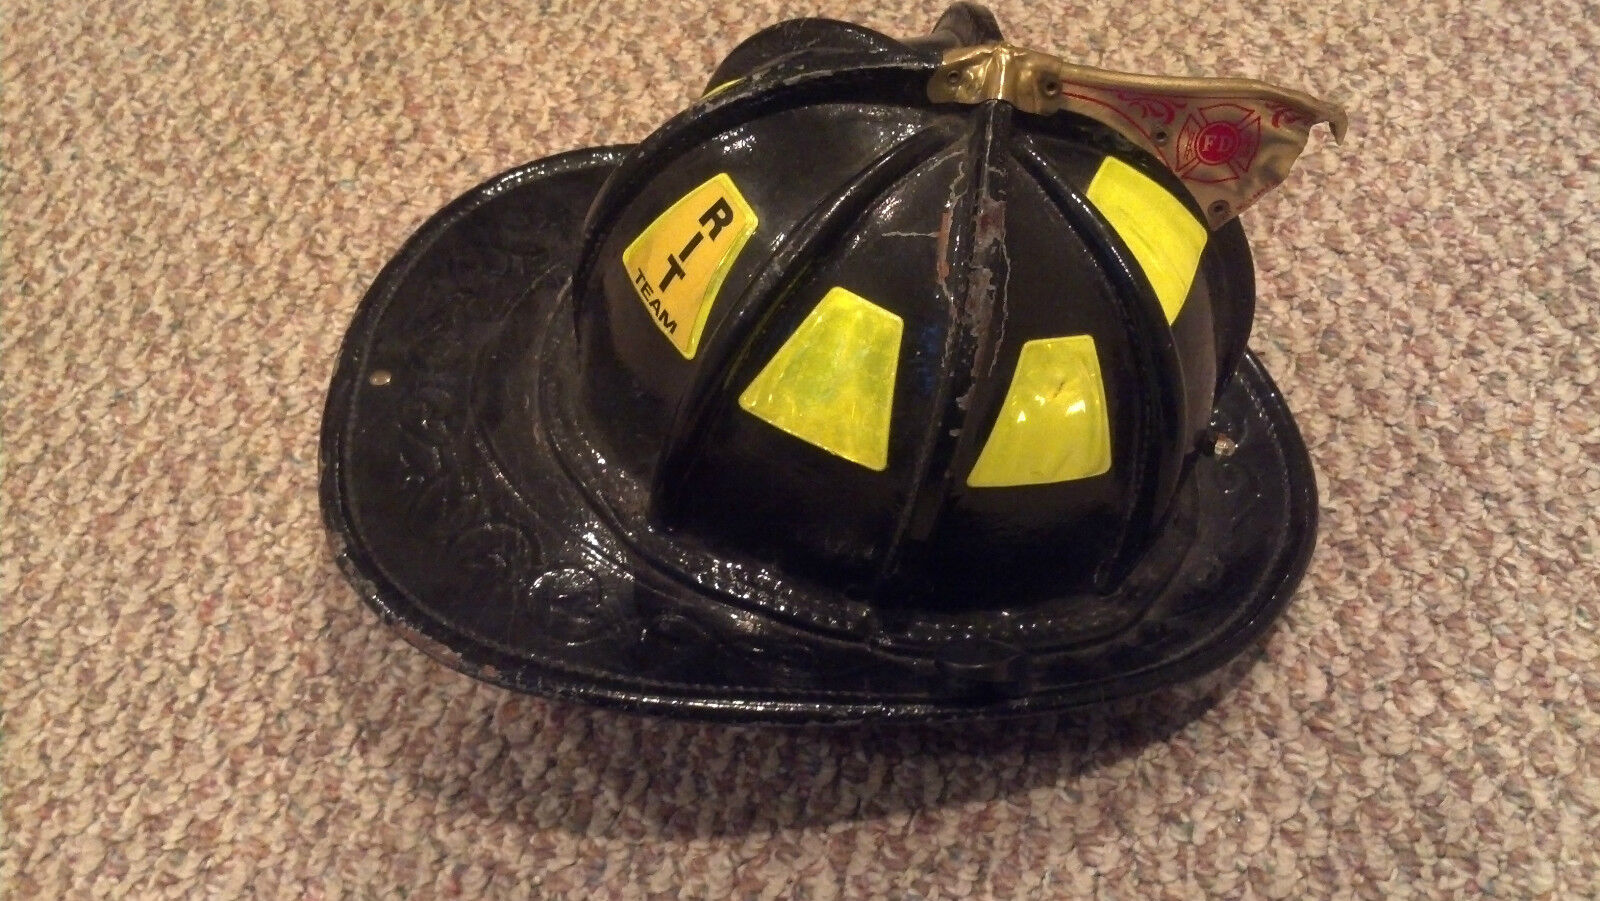 Cairns N6A Leather Fire Helmet